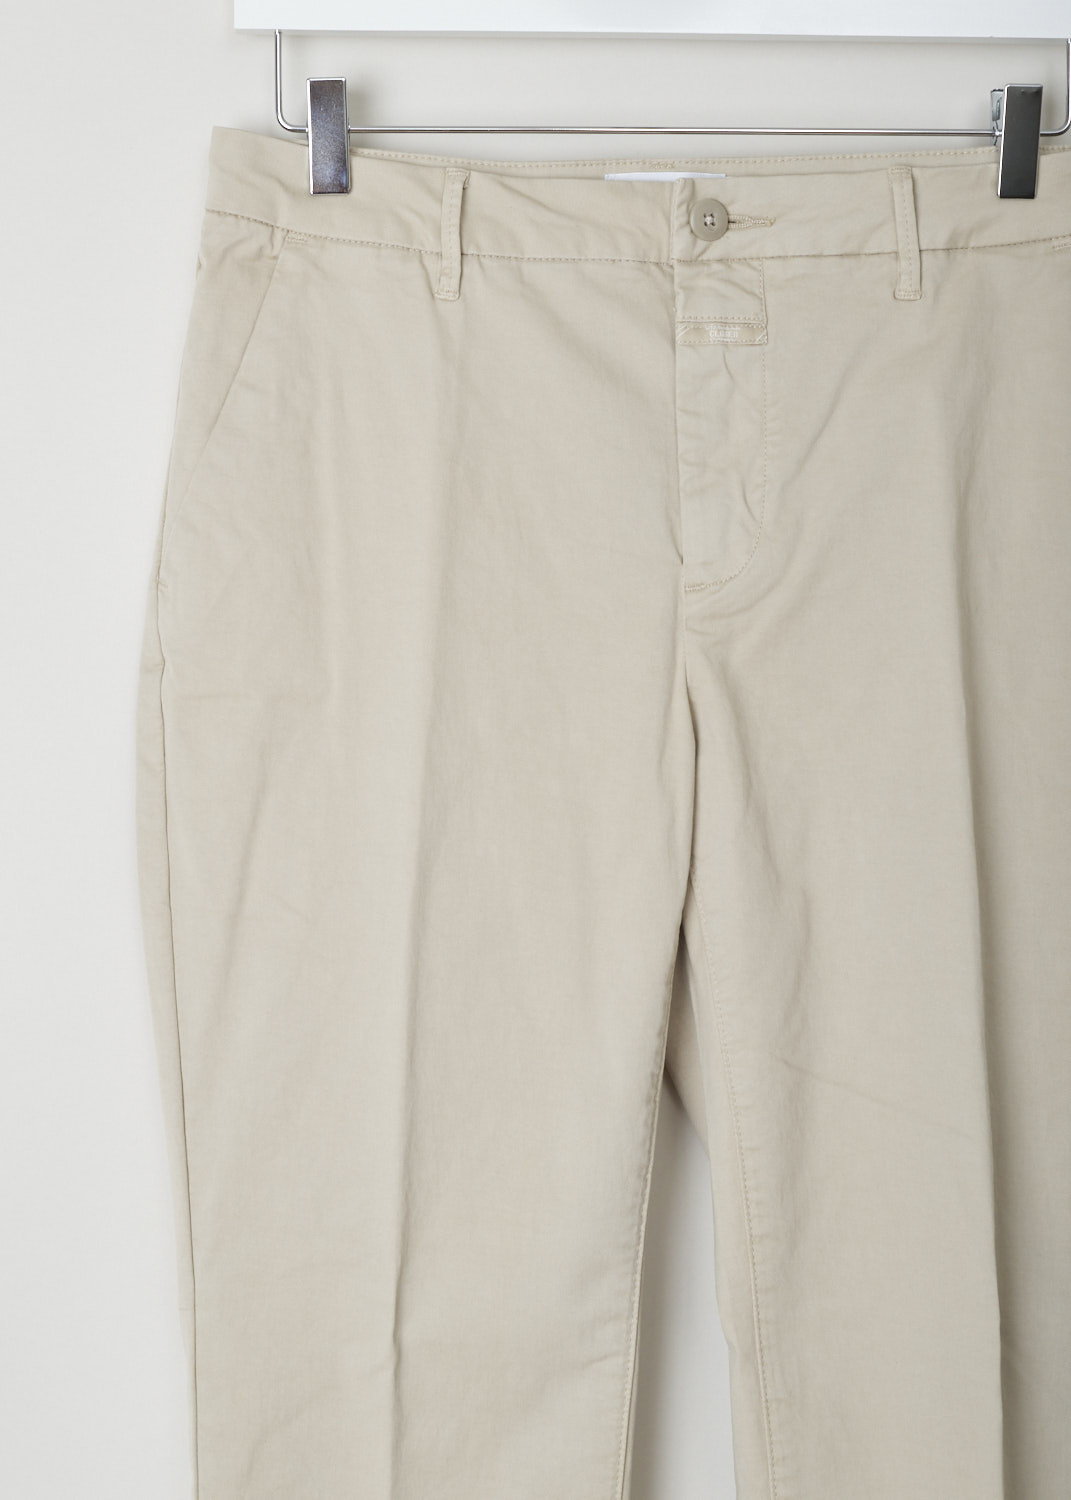 Closed, Beige flat front chino, jack_C91012_30G_17_249, beige, detail, This beige flat front chino is one of those must have basics that goes well anything you throw on it. Featuring a regular length, two forward slanted pockets on the front and two welt pockets on the back.